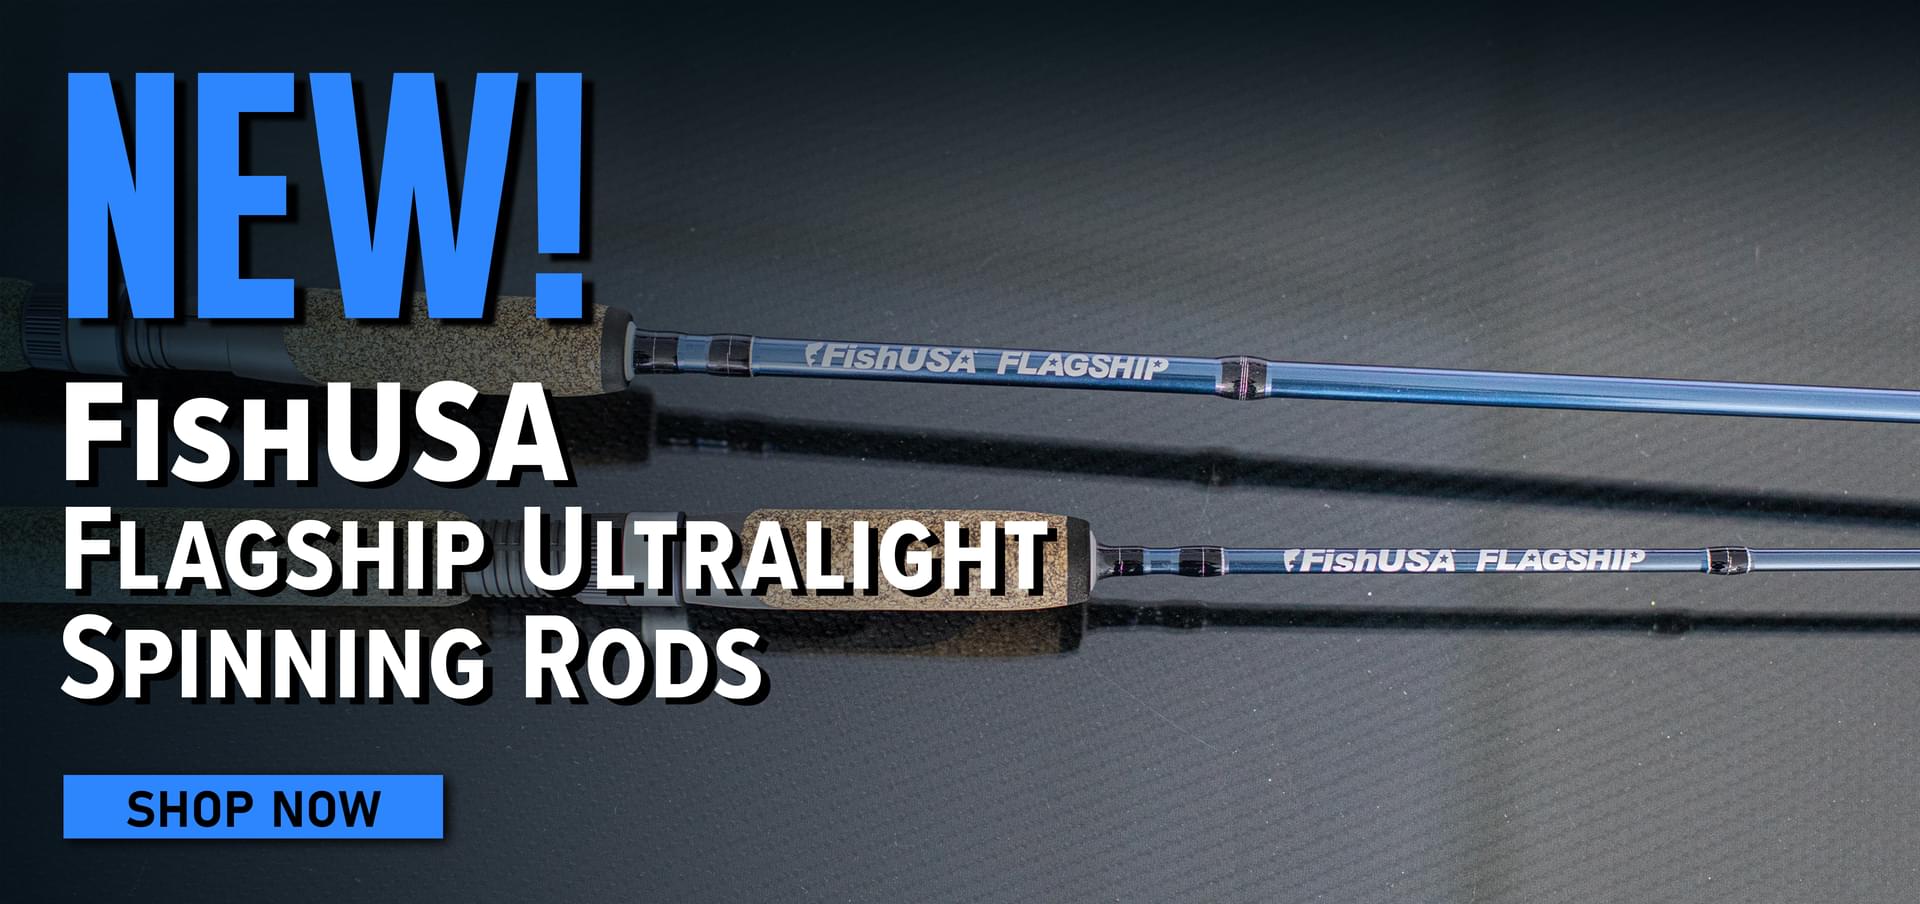 Add to Your Arsenal, Save up to 25% on FishUSA Flagship Rods! - Fish USA